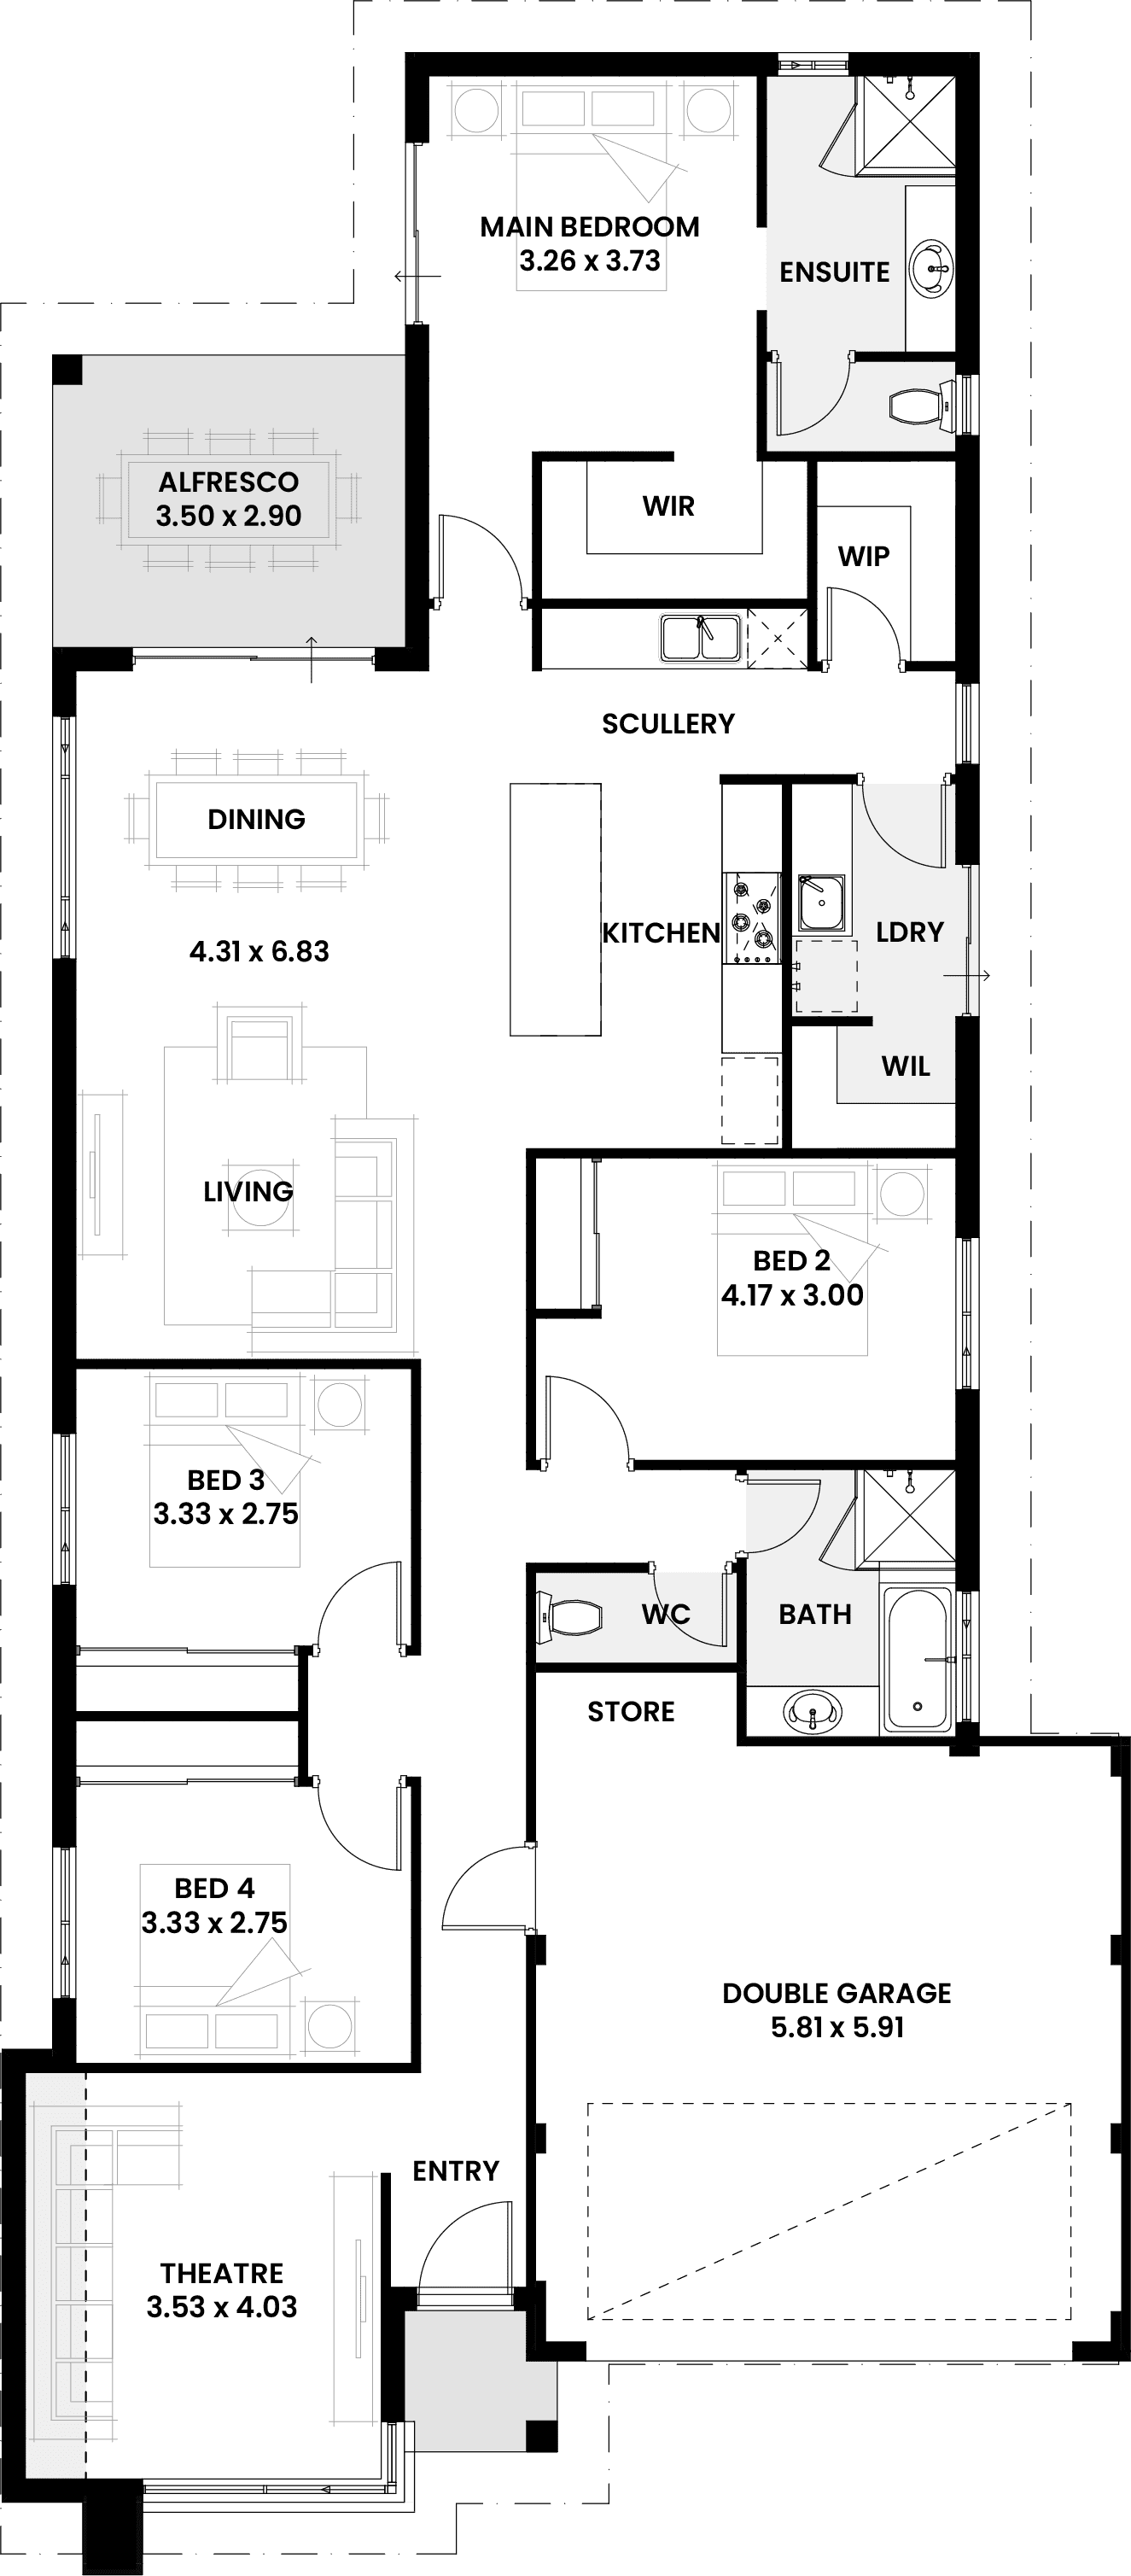 Floorplan for The Cypress, a Move Homes new home design perfect for first time buyers and new builders in Perth